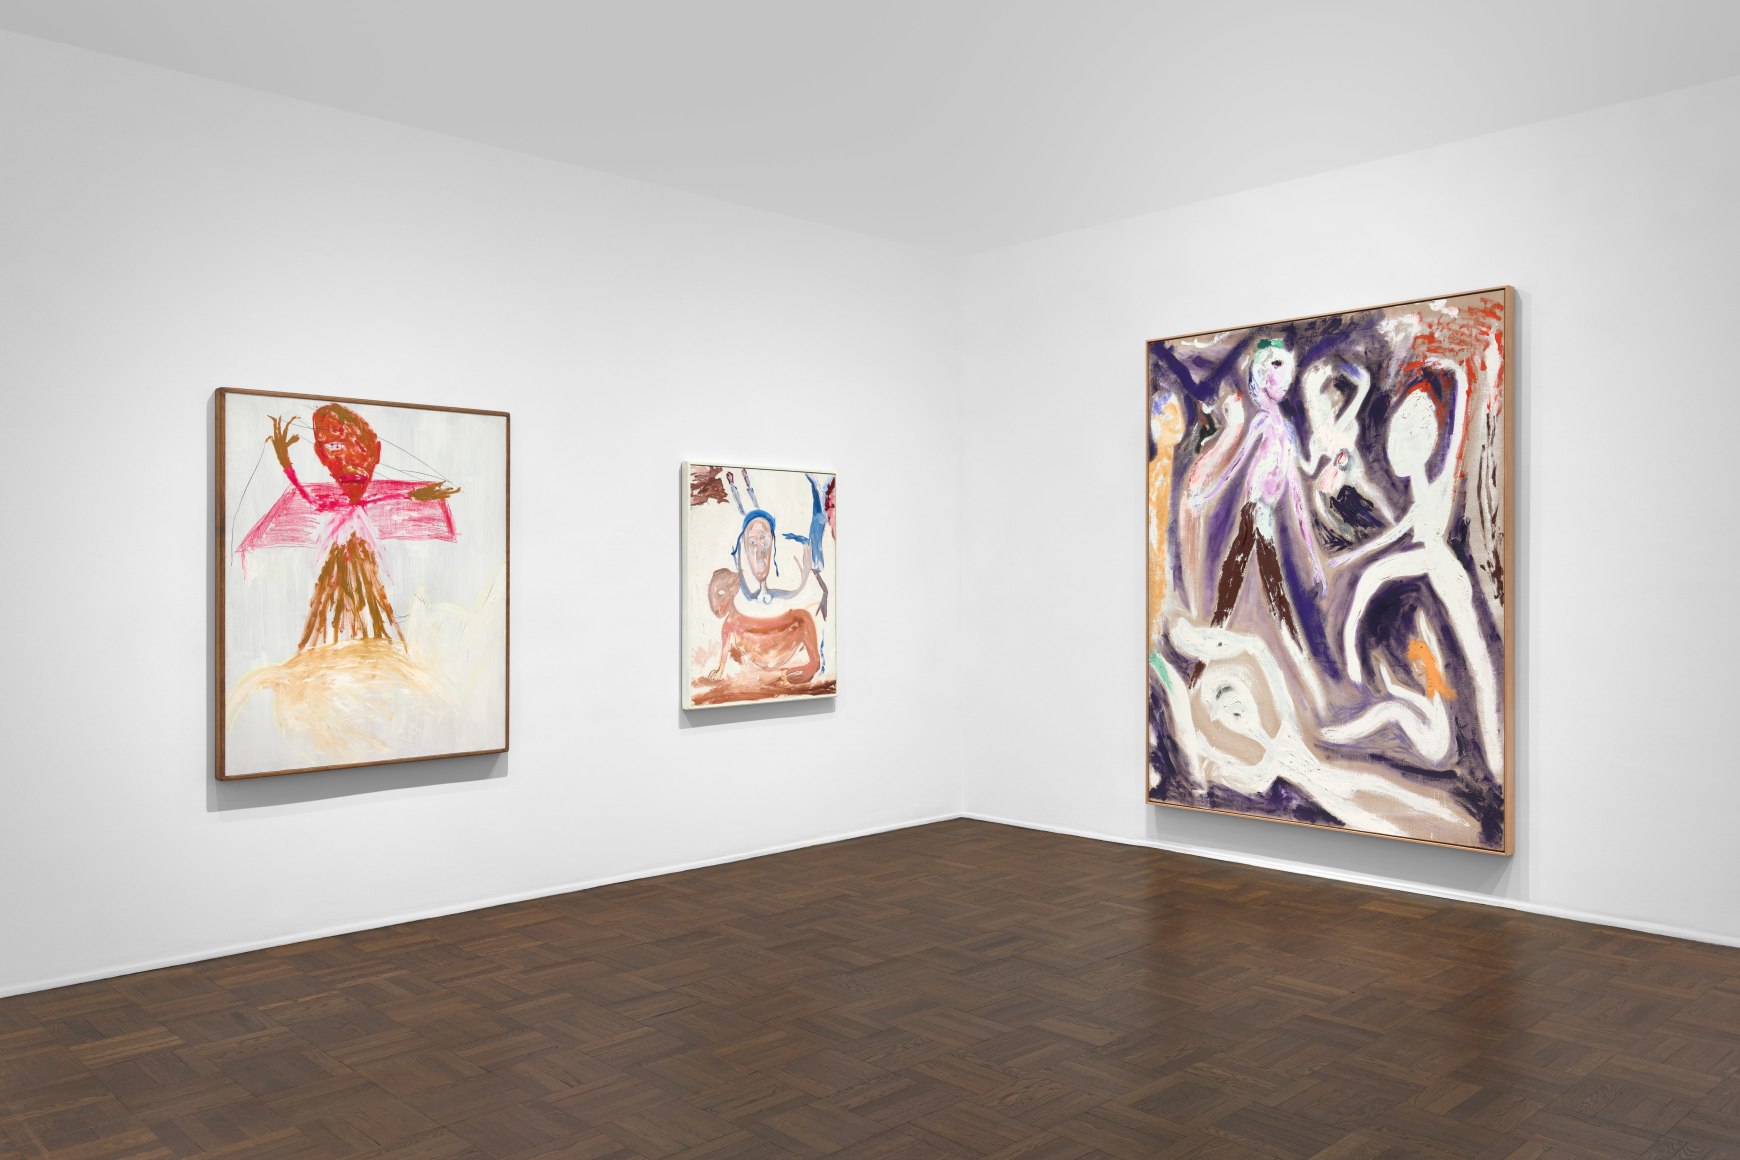 Don Van Vliet, Parapliers the Willow Dipped, Paintings 1967-1997, New York, 2020, Installation Image 2